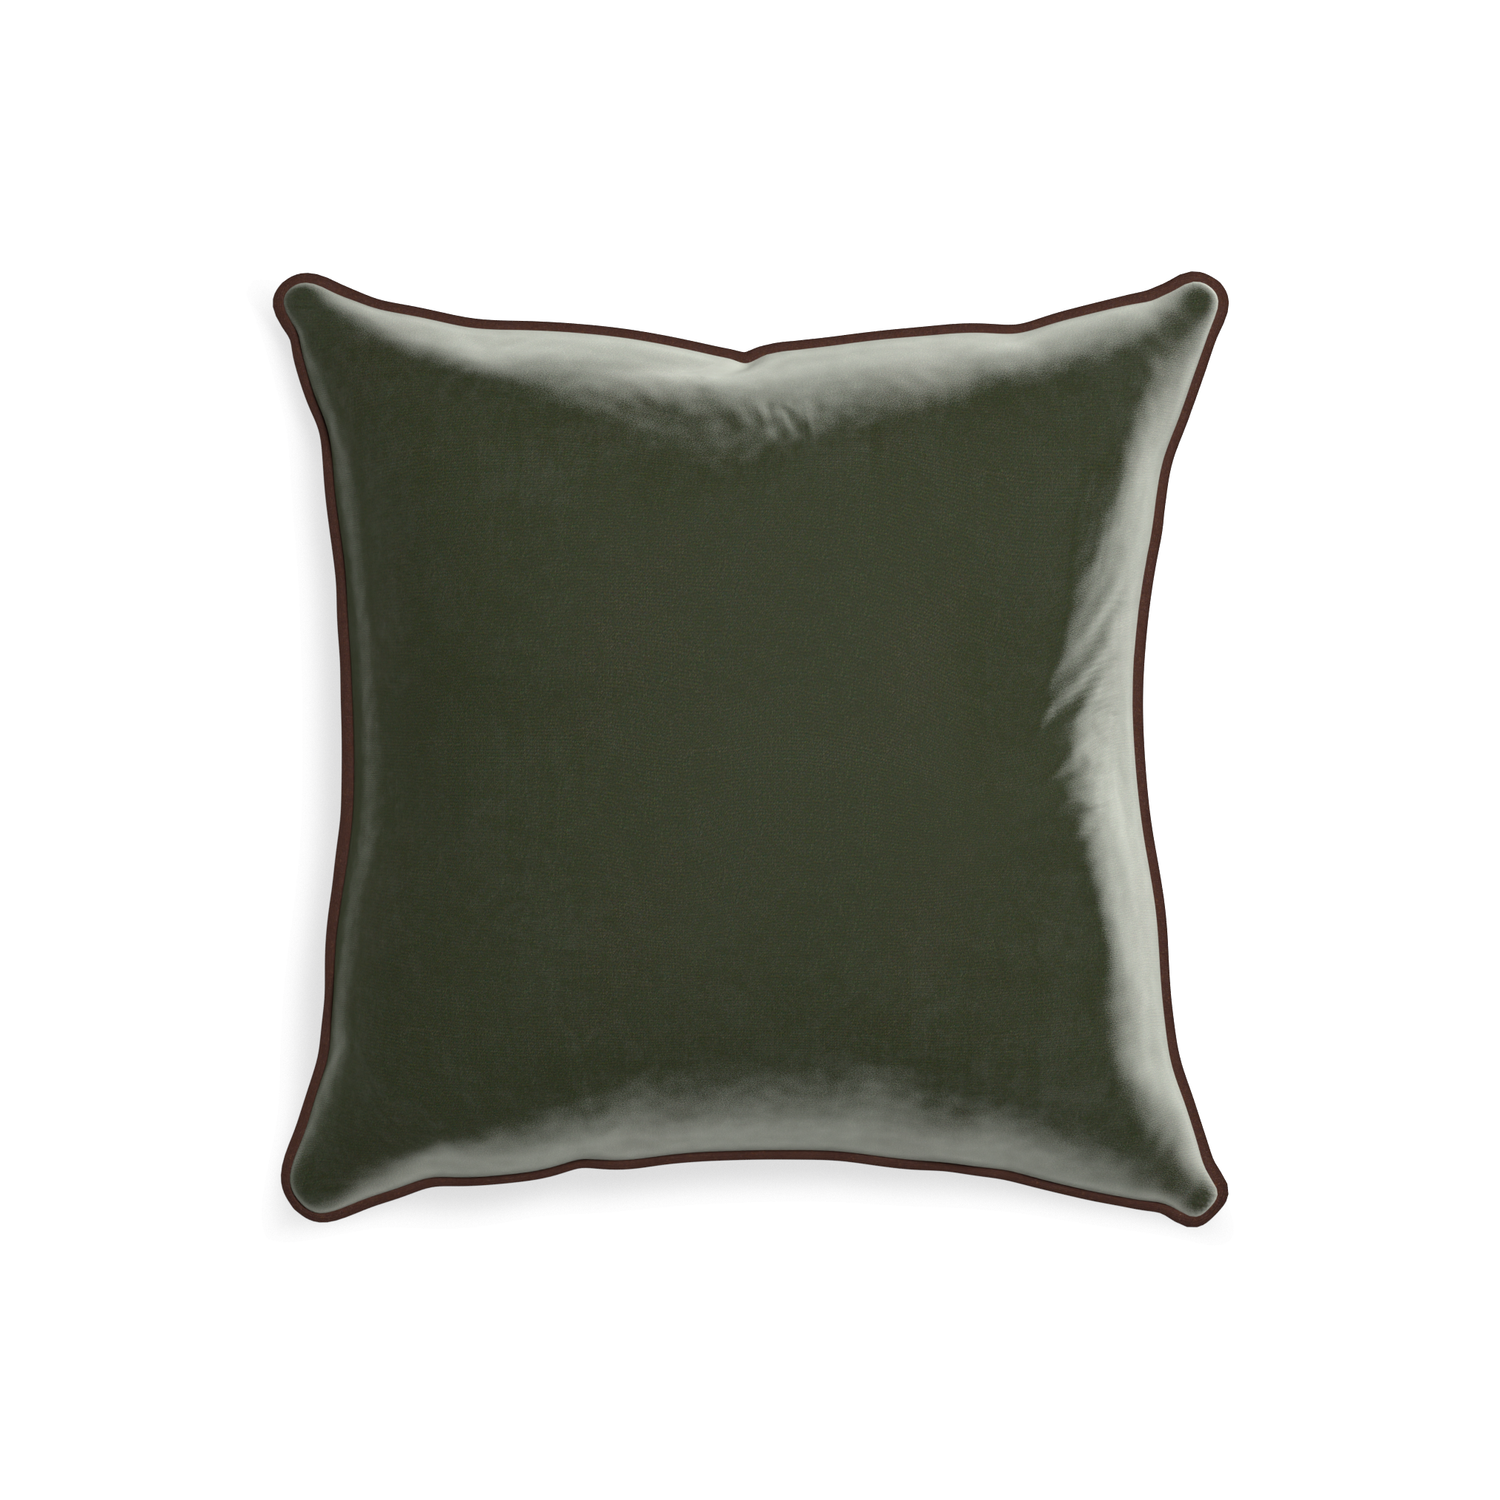 20-square fern velvet custom fern greenpillow with w piping on white background